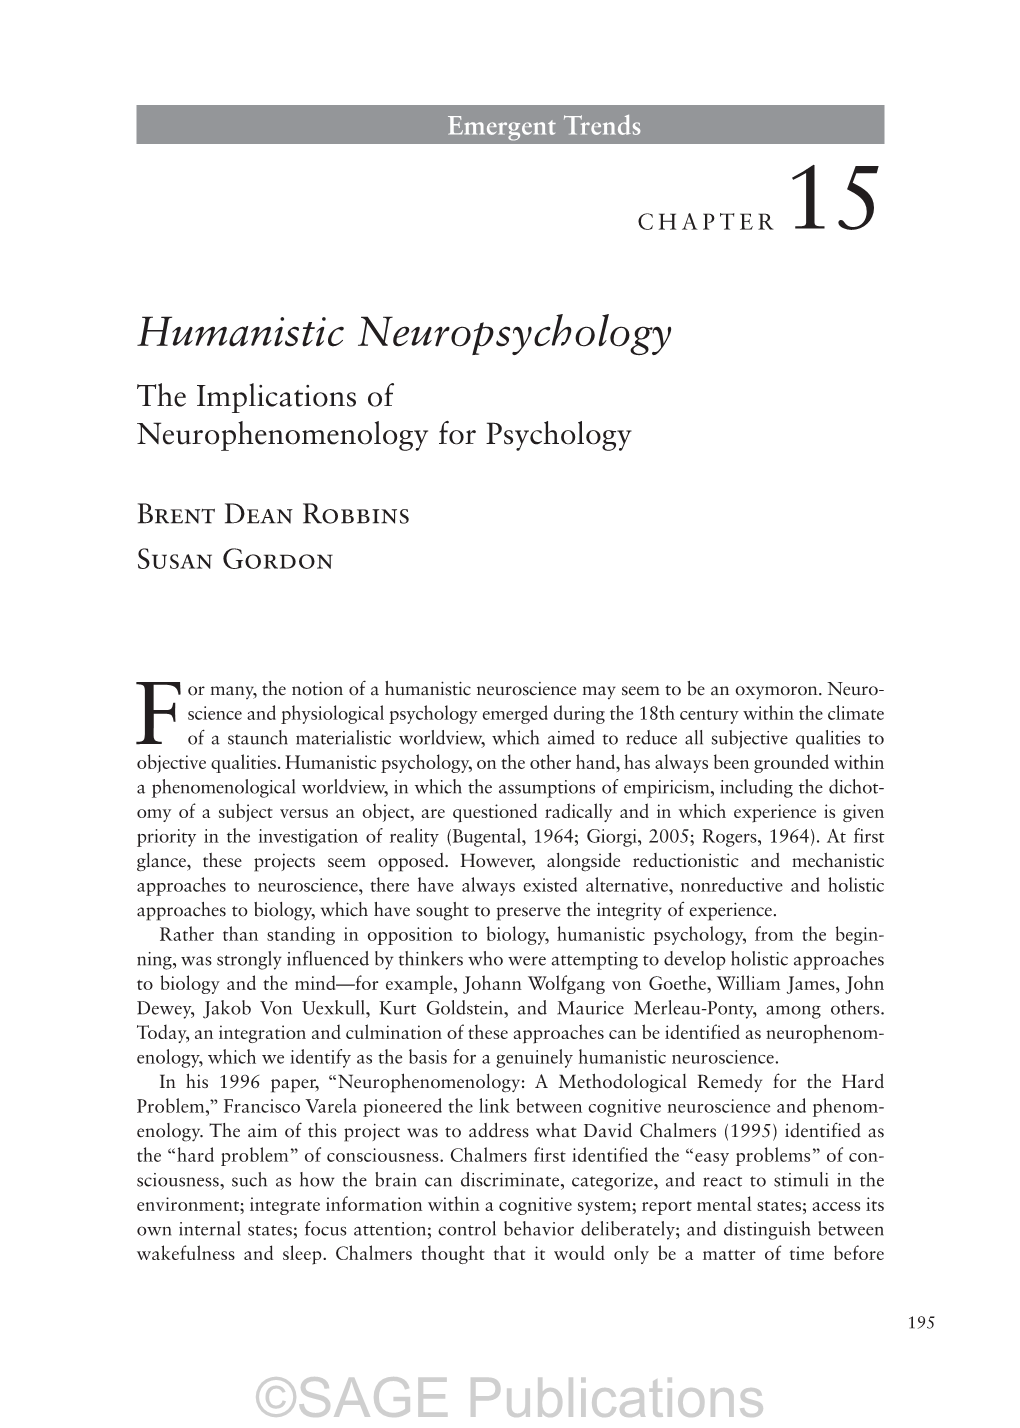 Humanistic Neuropsychology the Implications of Neurophenomenology for Psychology